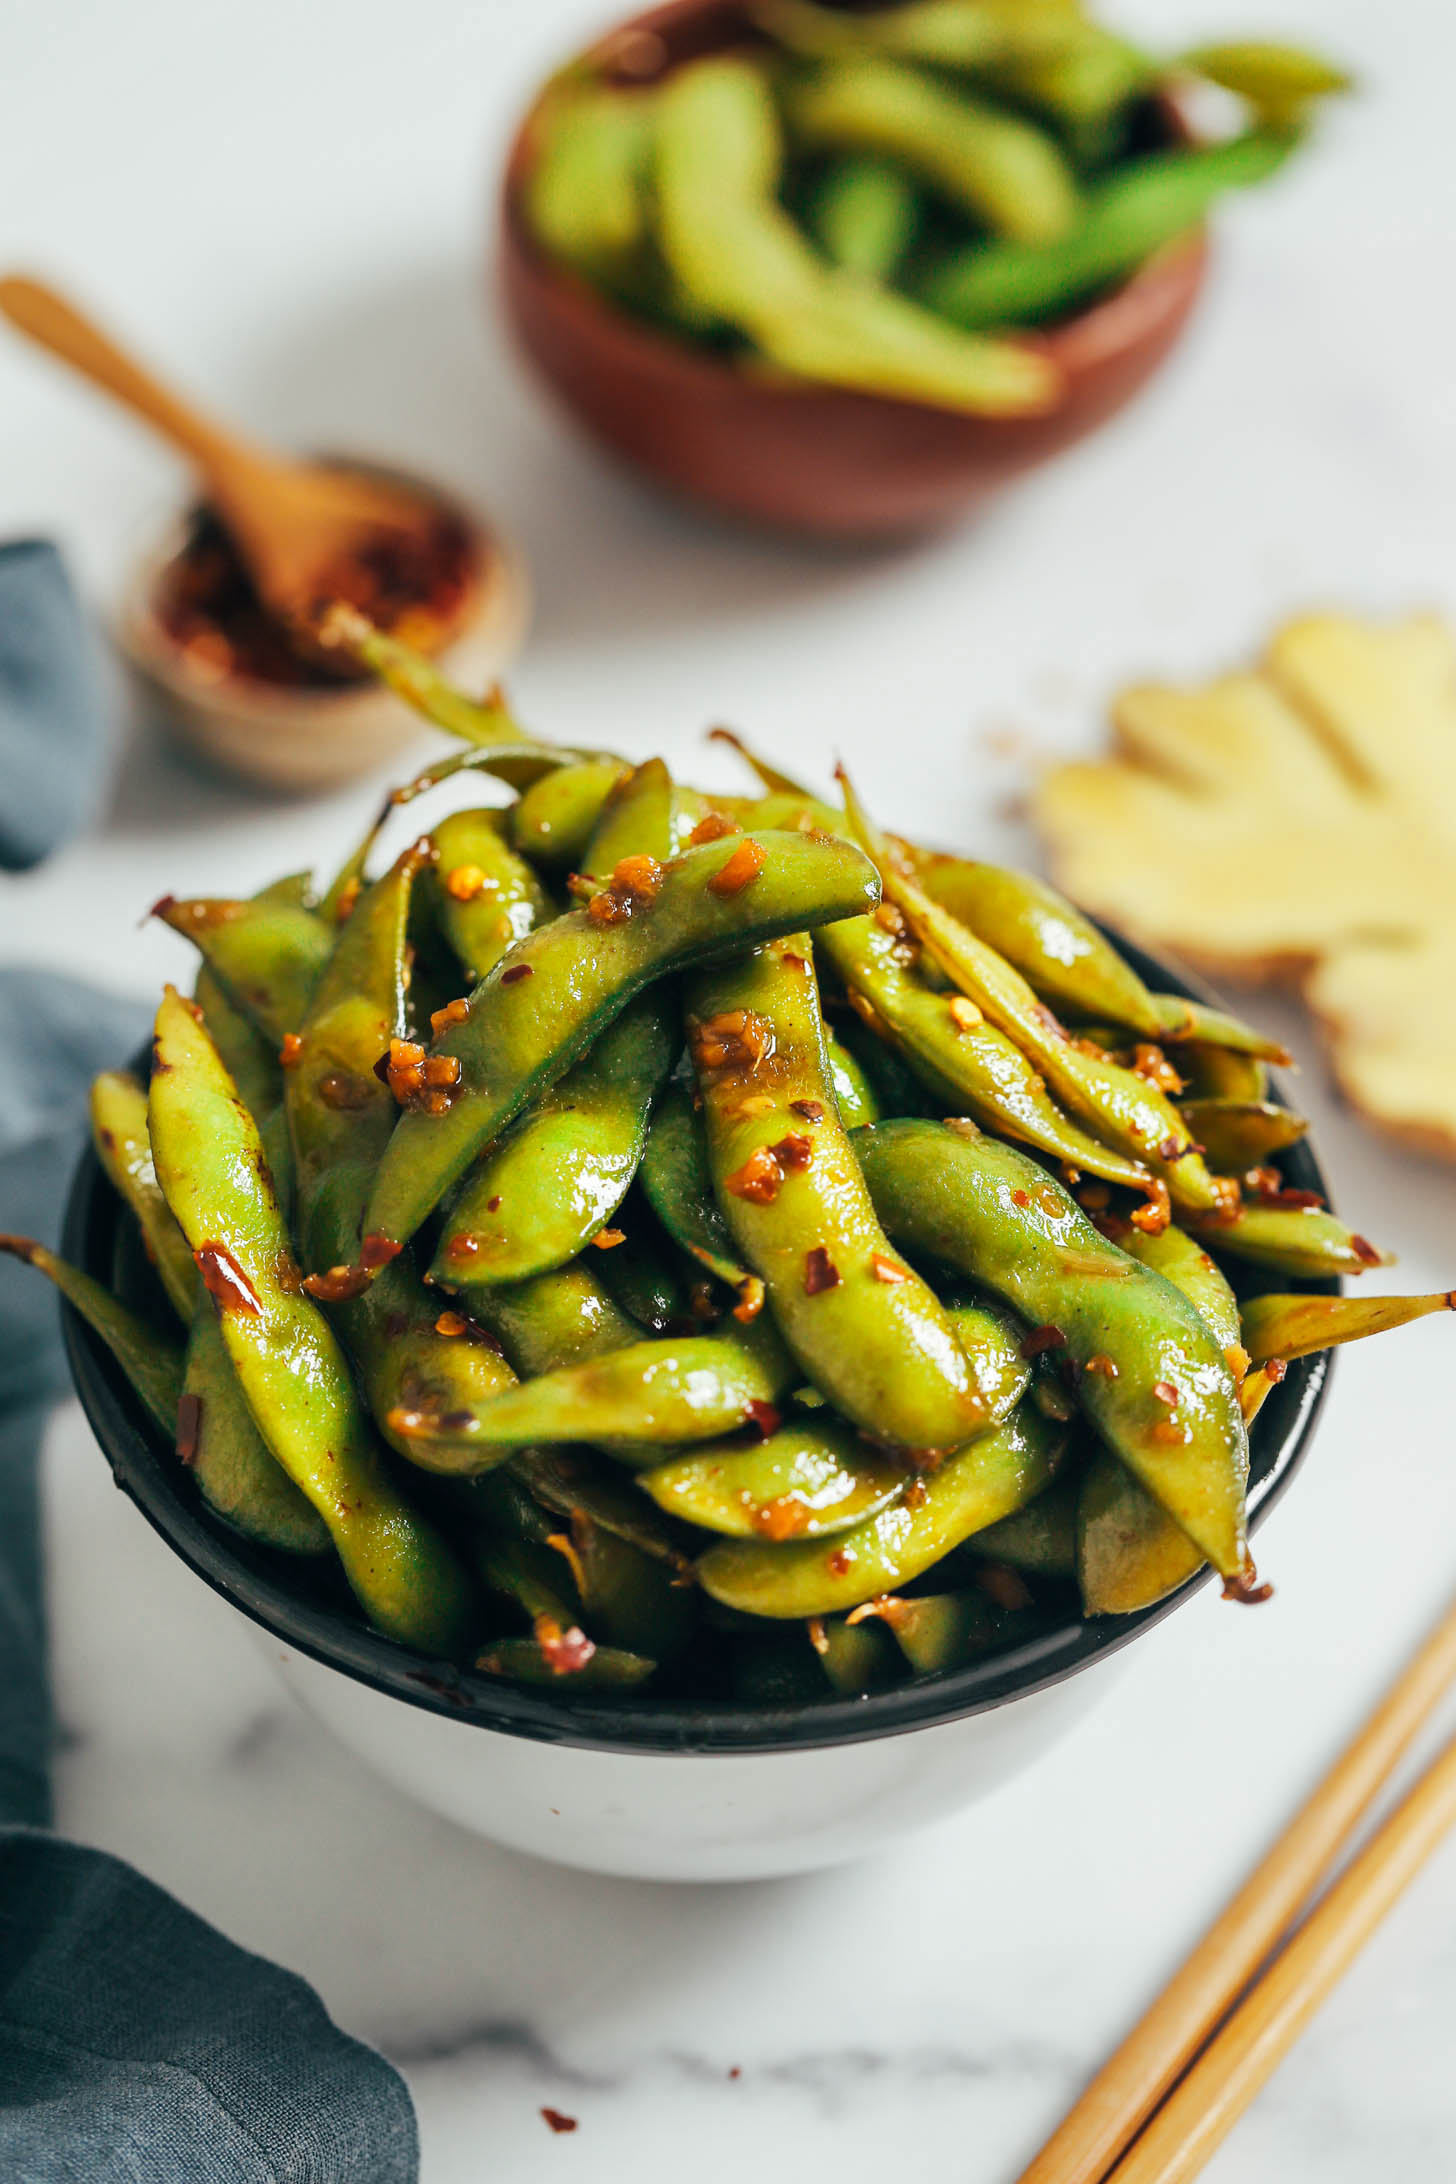 Overflowing bowl of spicy chili garlic edamame in pods